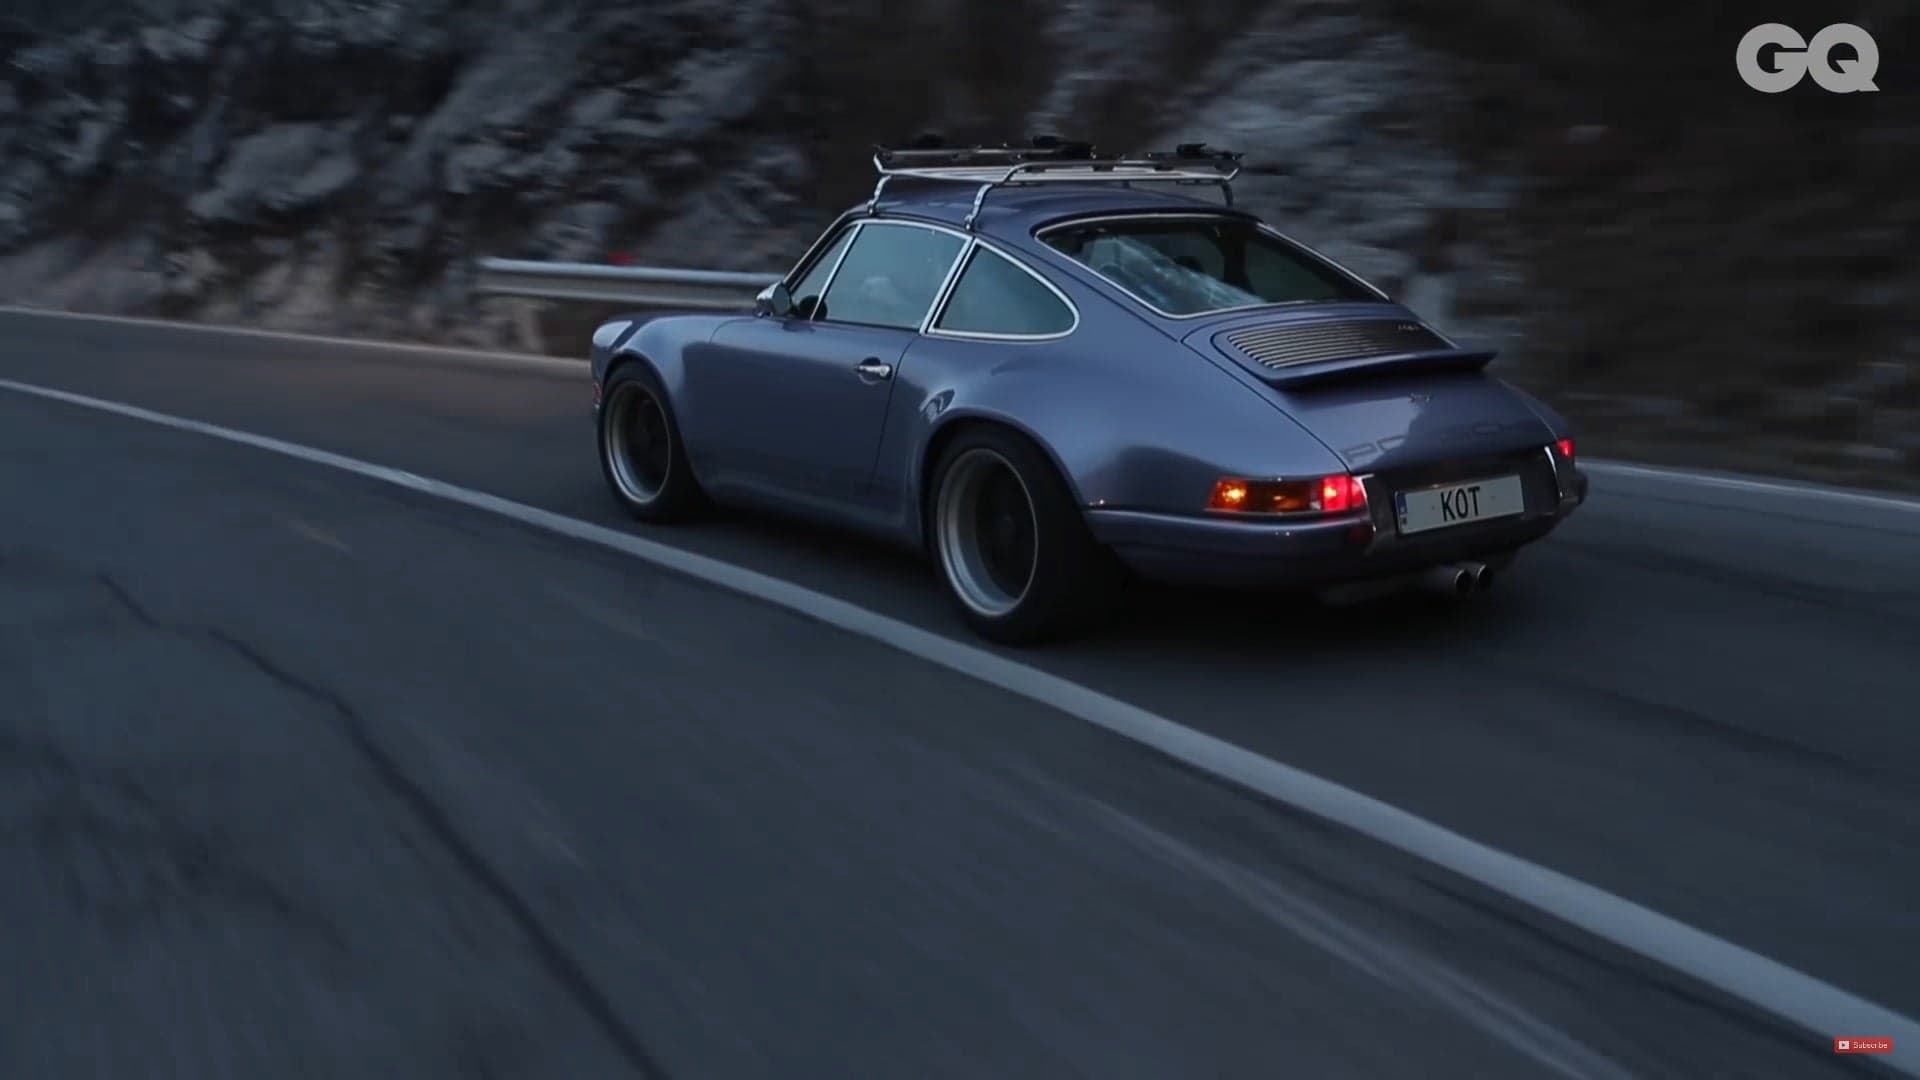 This Singer Modified 911 Features All Wheel Drive And A Roof Rack